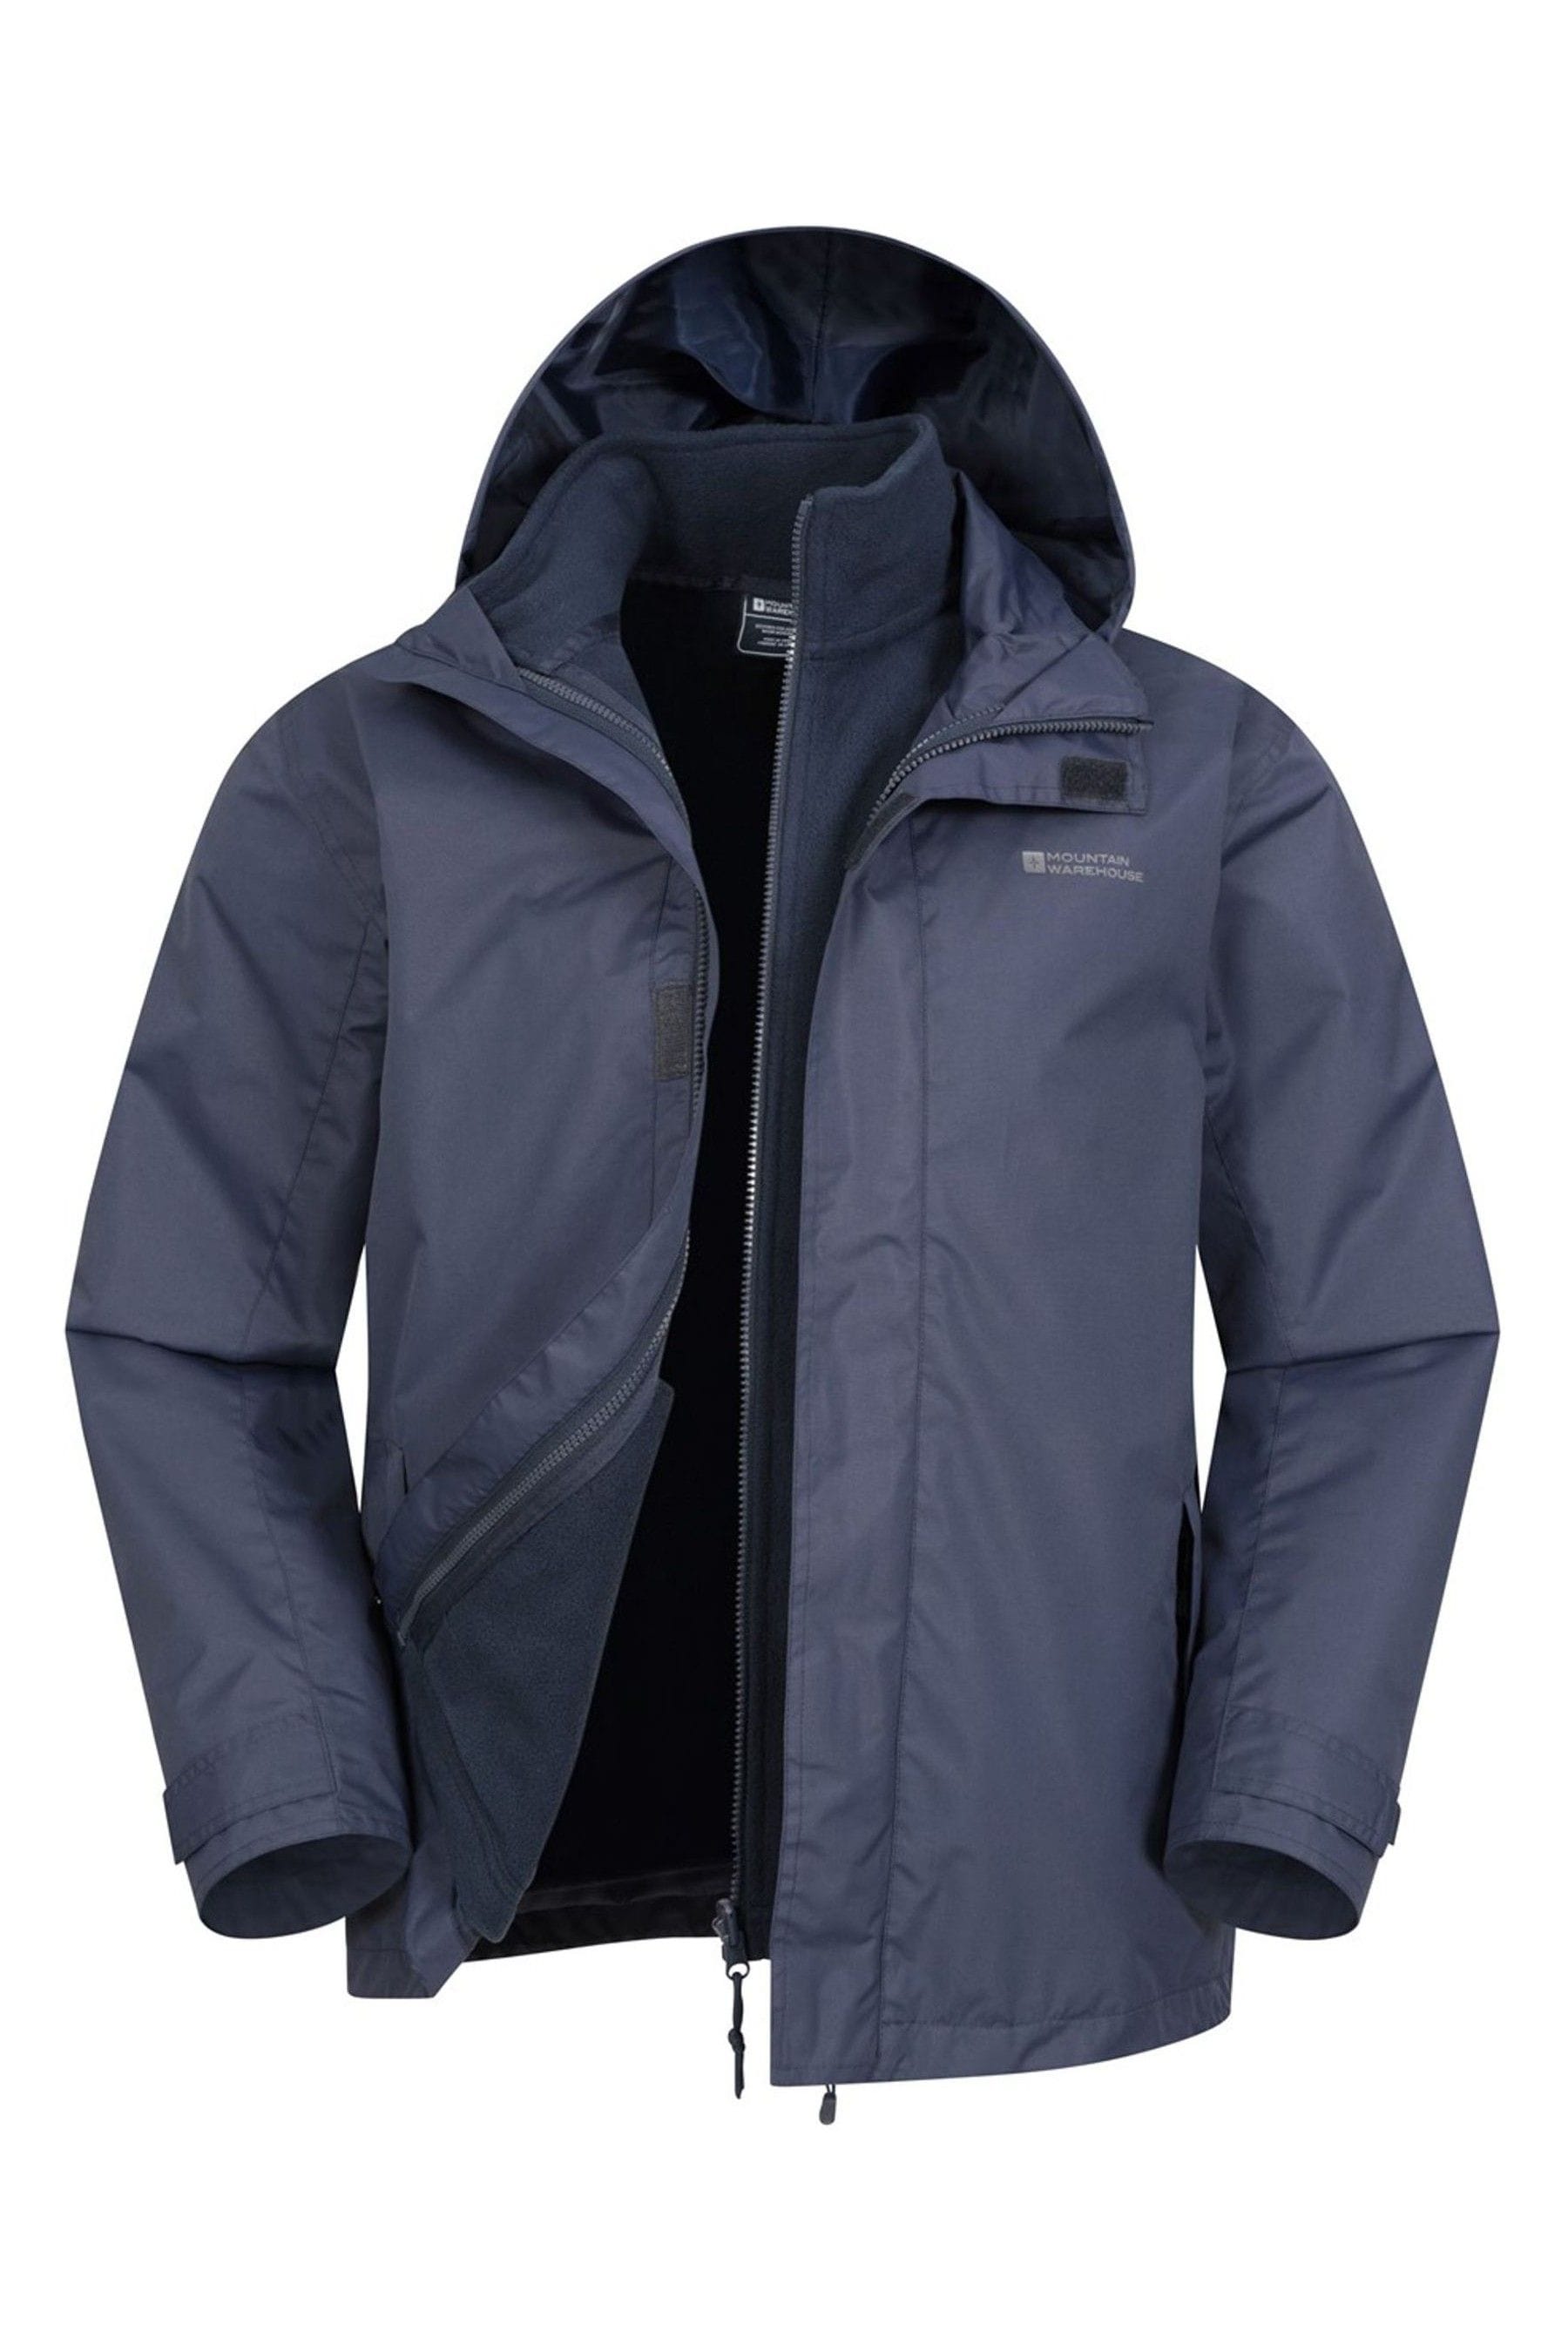 Buy Mountain Warehouse Fell 3 in 1 Water Resistant Jacket - Mens from ...